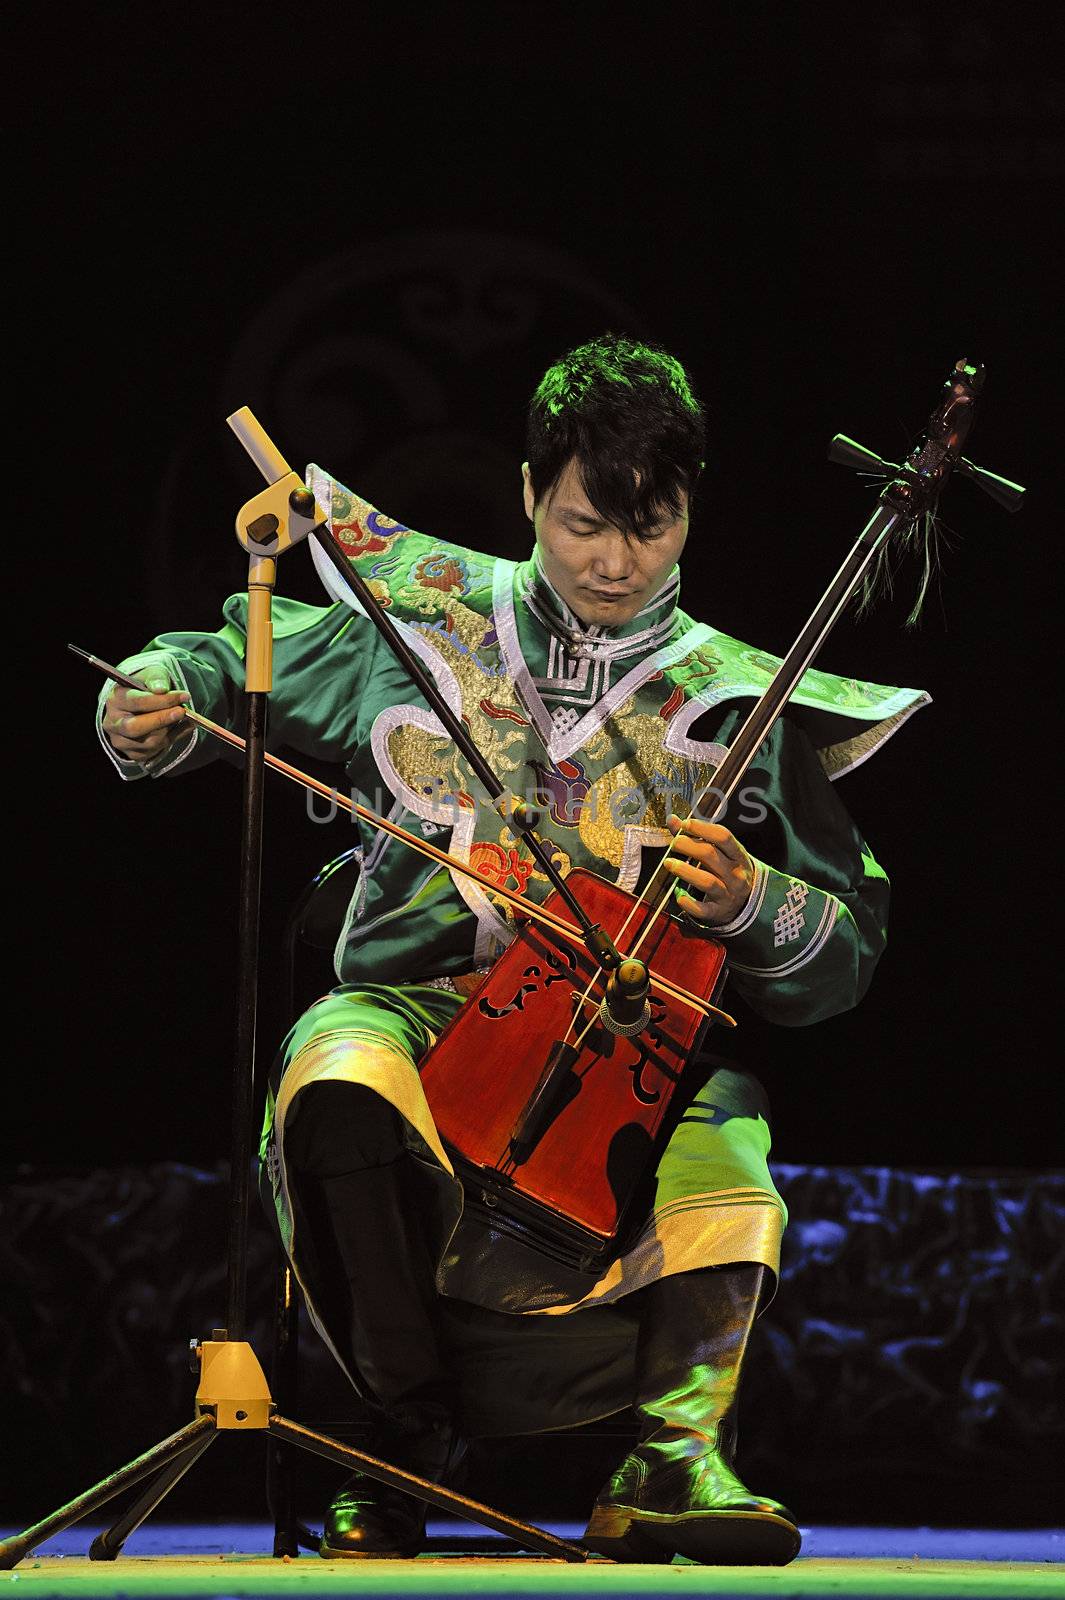 CHENGDU - SEP 28: Mongolian ethnic musician performs on stage in the 6th Sichuan minority nationality culture festival at JINJIANG theater.Sep 28,2010 in Chengdu, China.